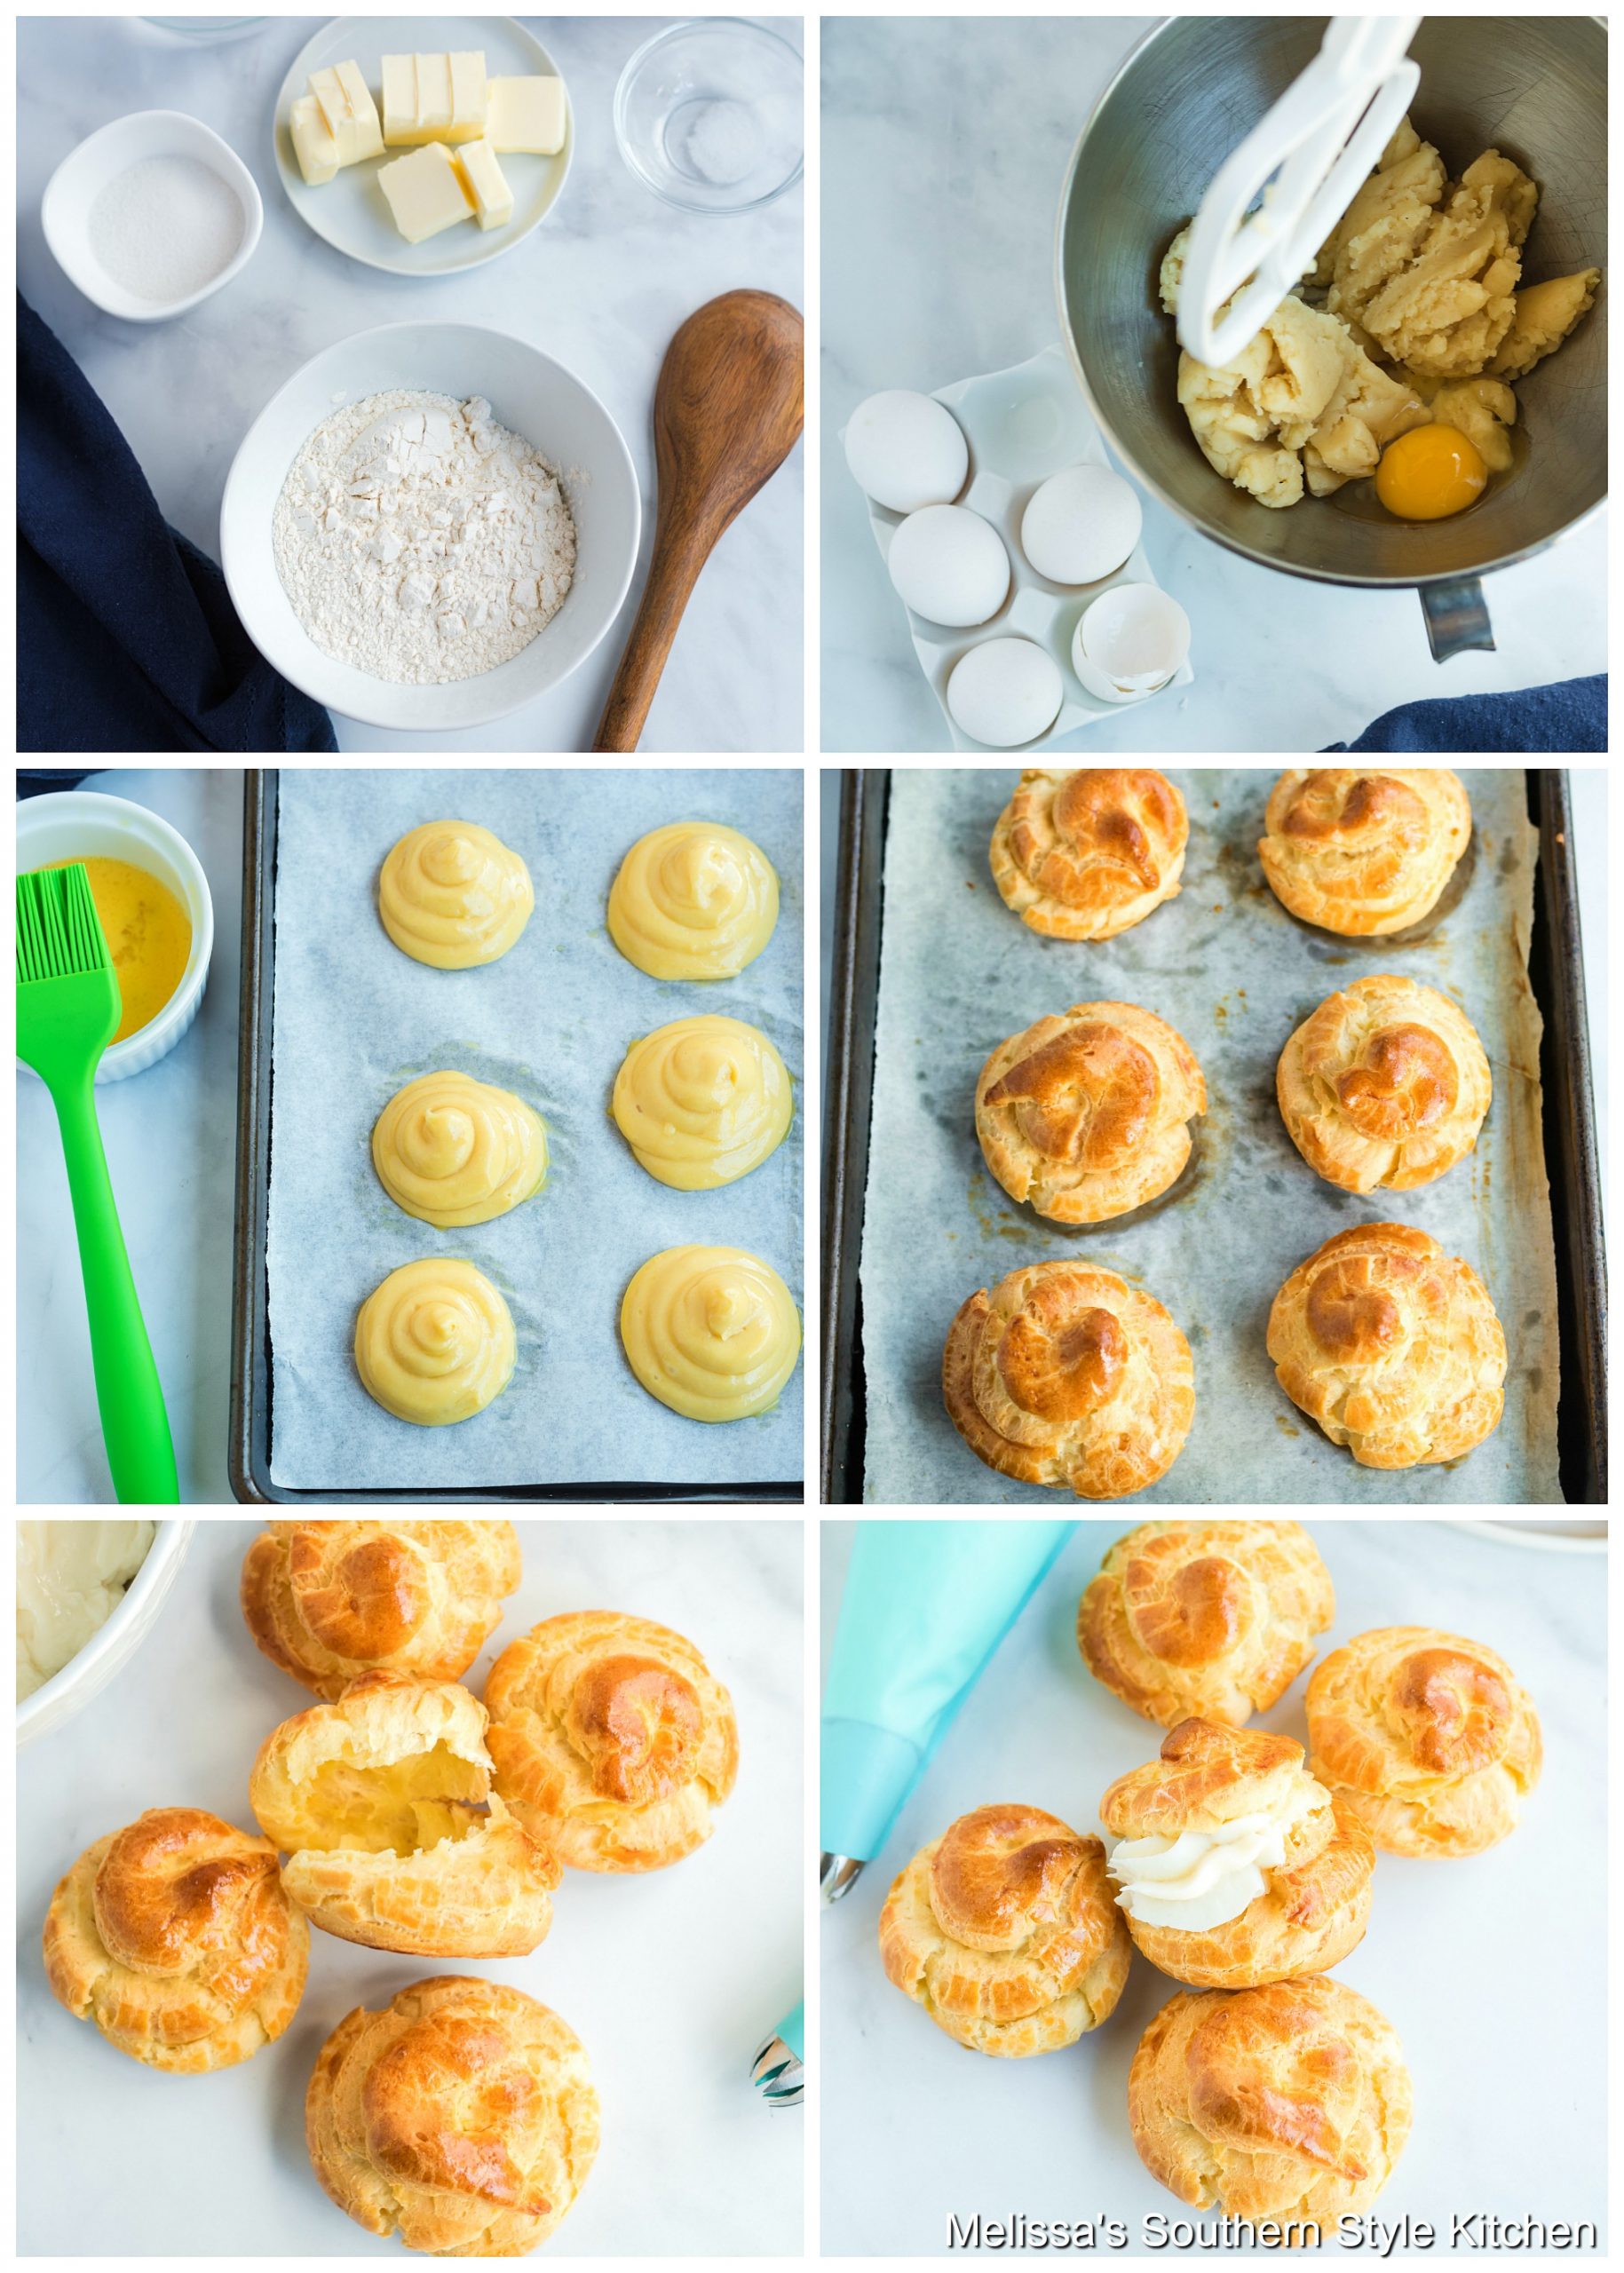 Step-by-step preparation images and ingredients to make Cream Puffs